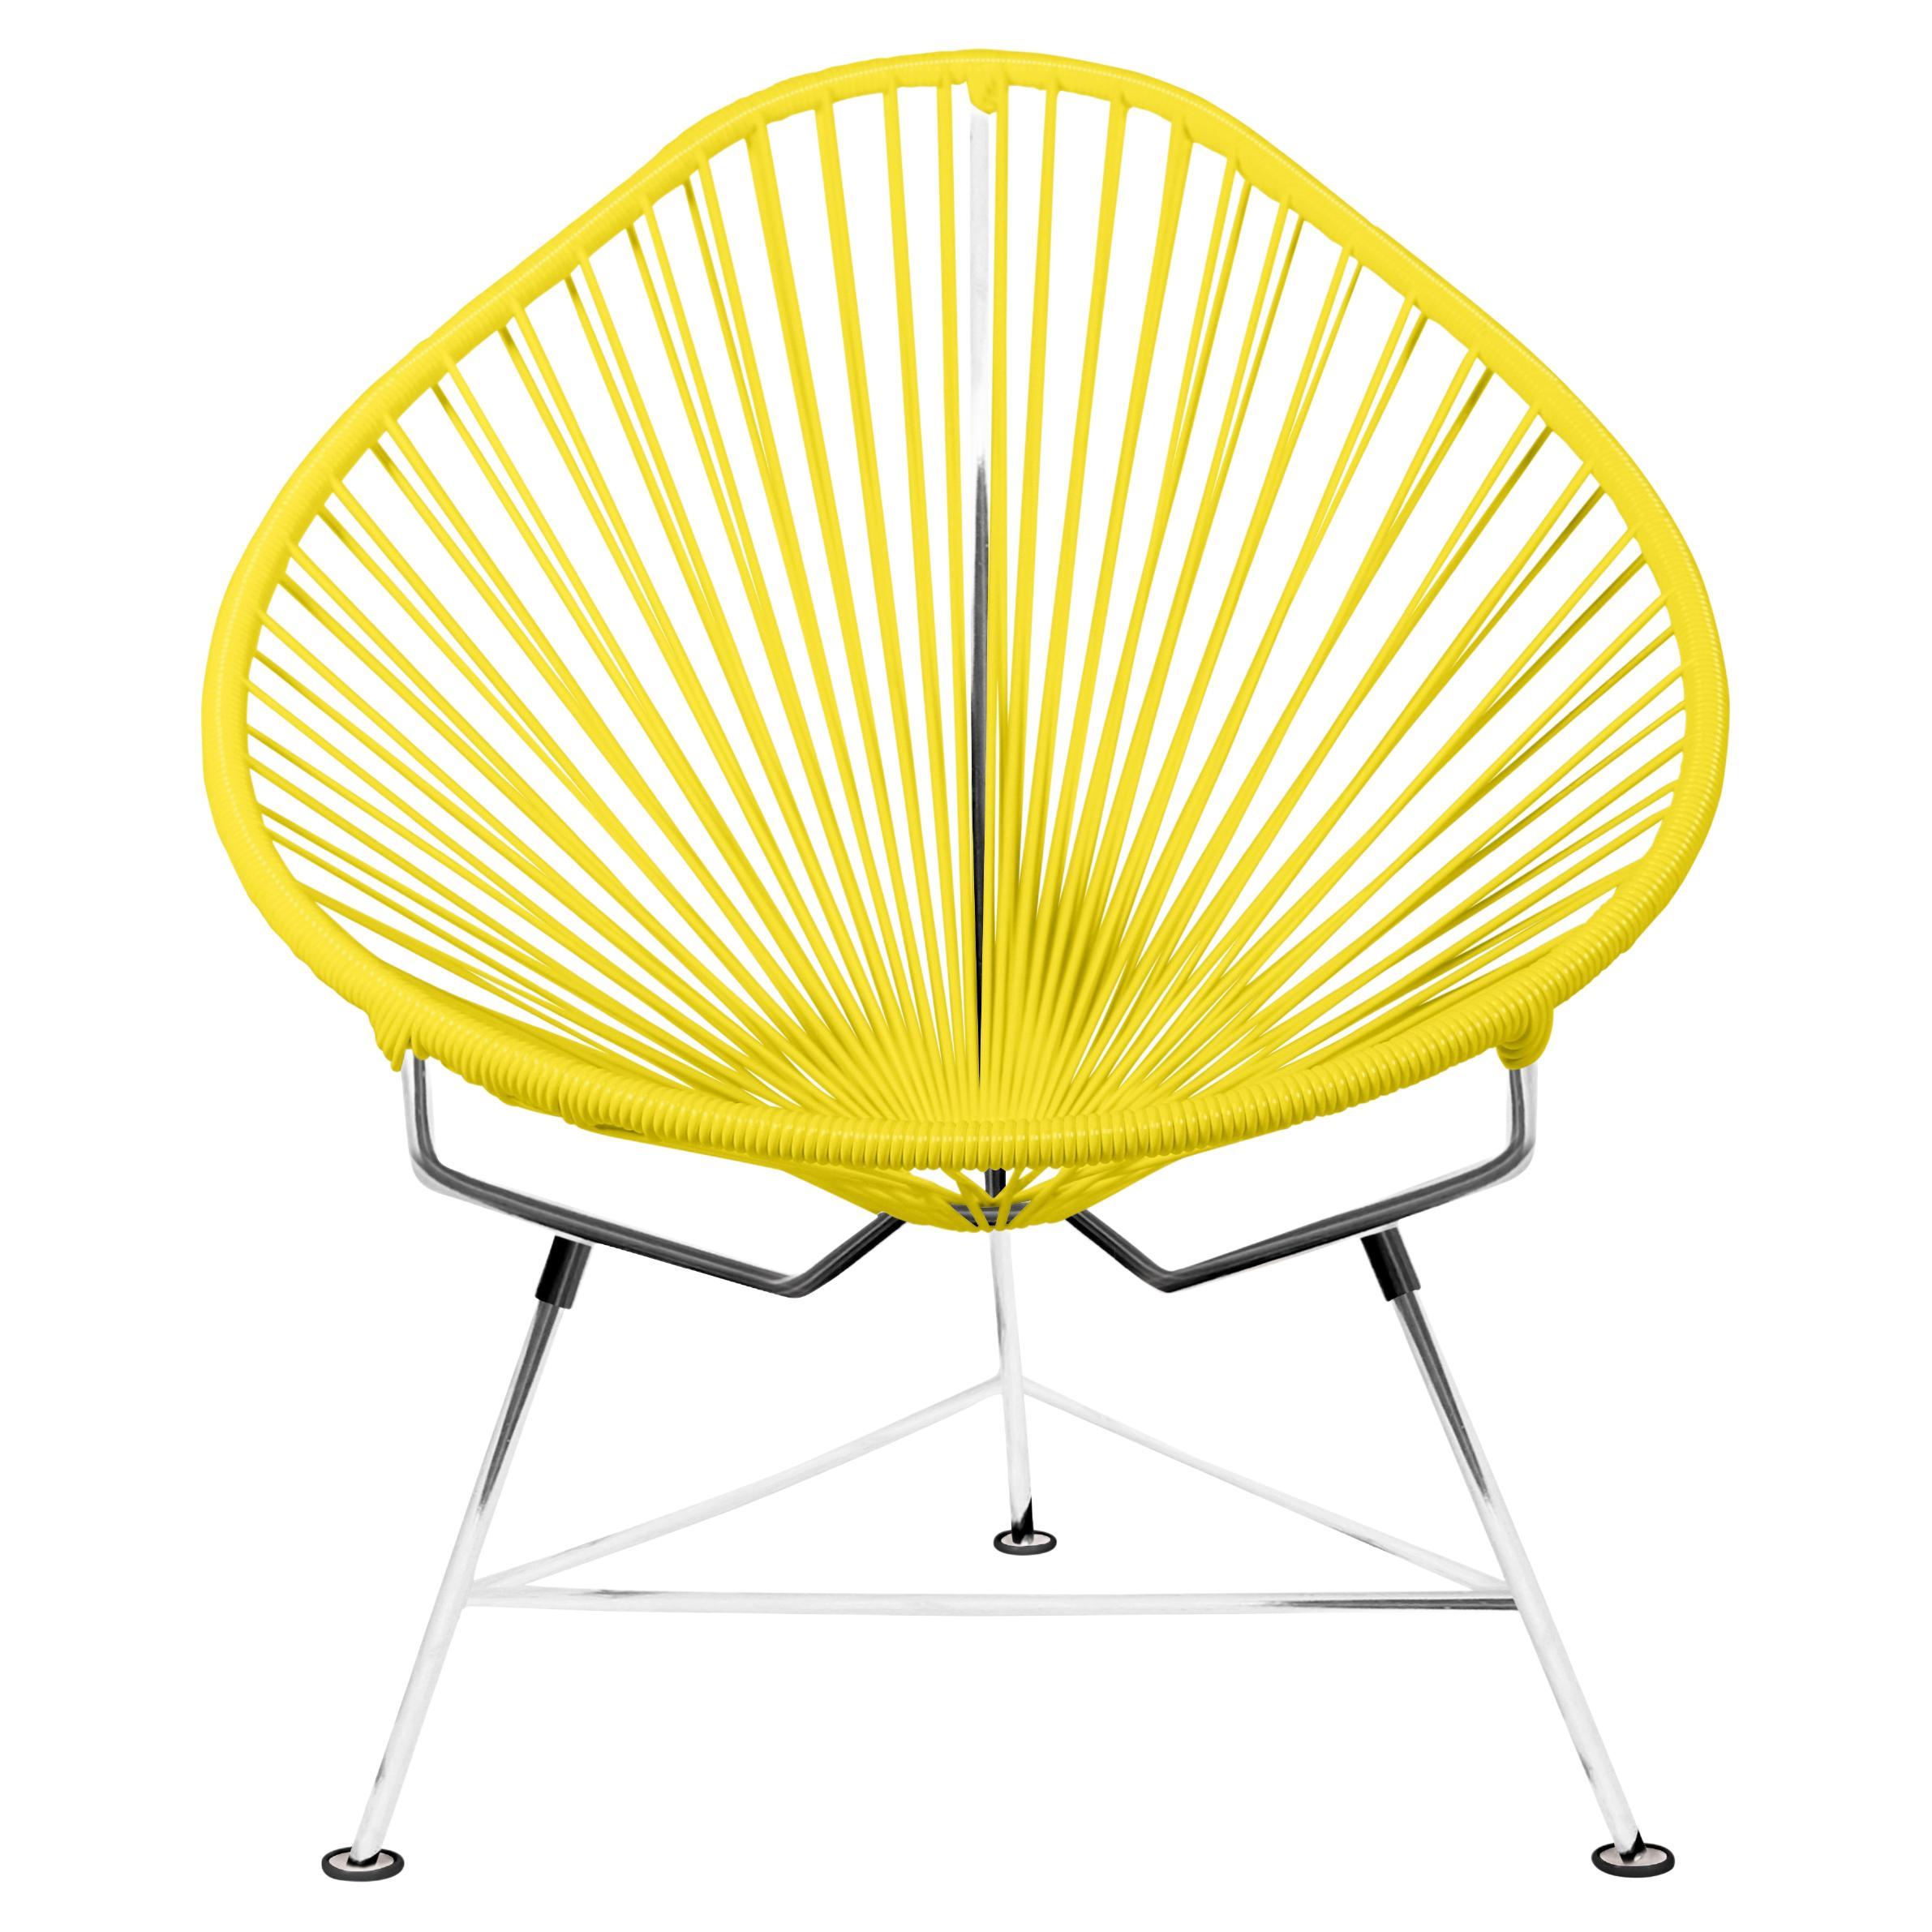 Innit Designs Acapulco Chair Yellow Weave on Chrome Frame